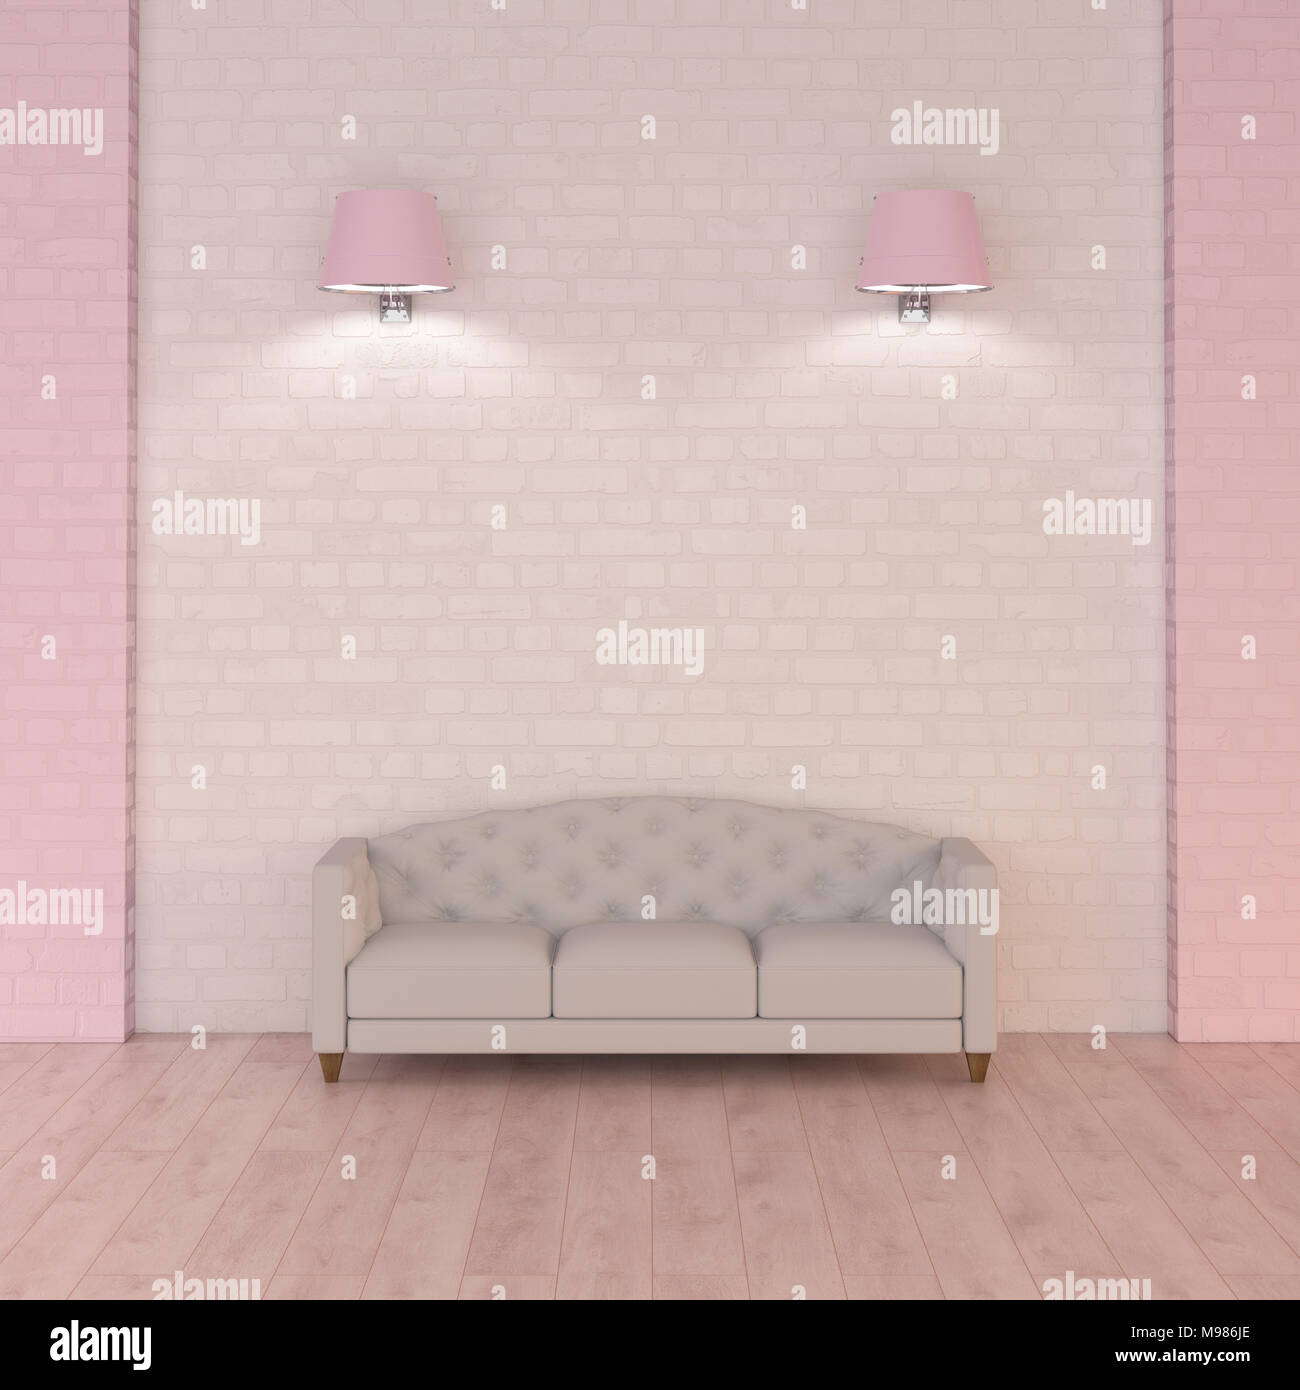 Couch unter rosa Wand Lampen, 3D-Rendering Stockfoto